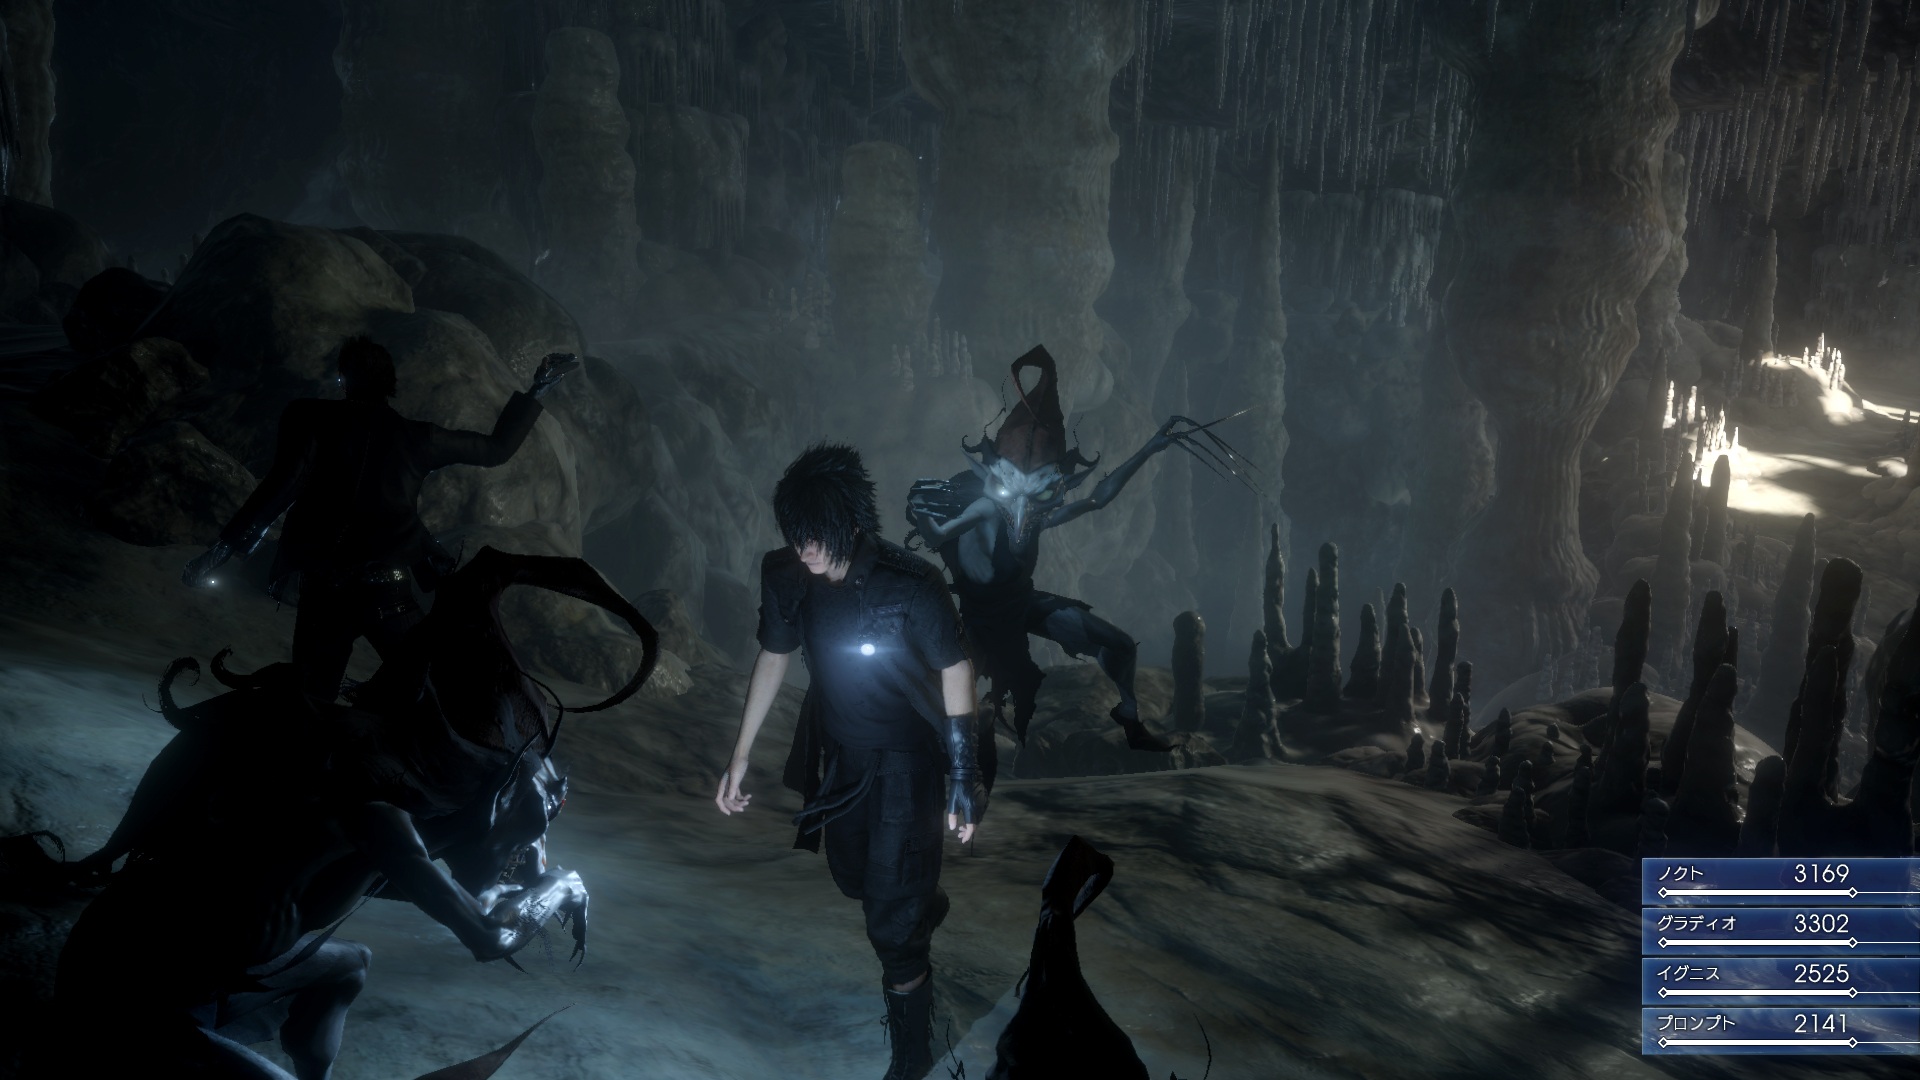 Brotherhood: Final Fantasy XV's Fifth Episode Coming at Tokyo Game Show;  Screenshots and Art Released